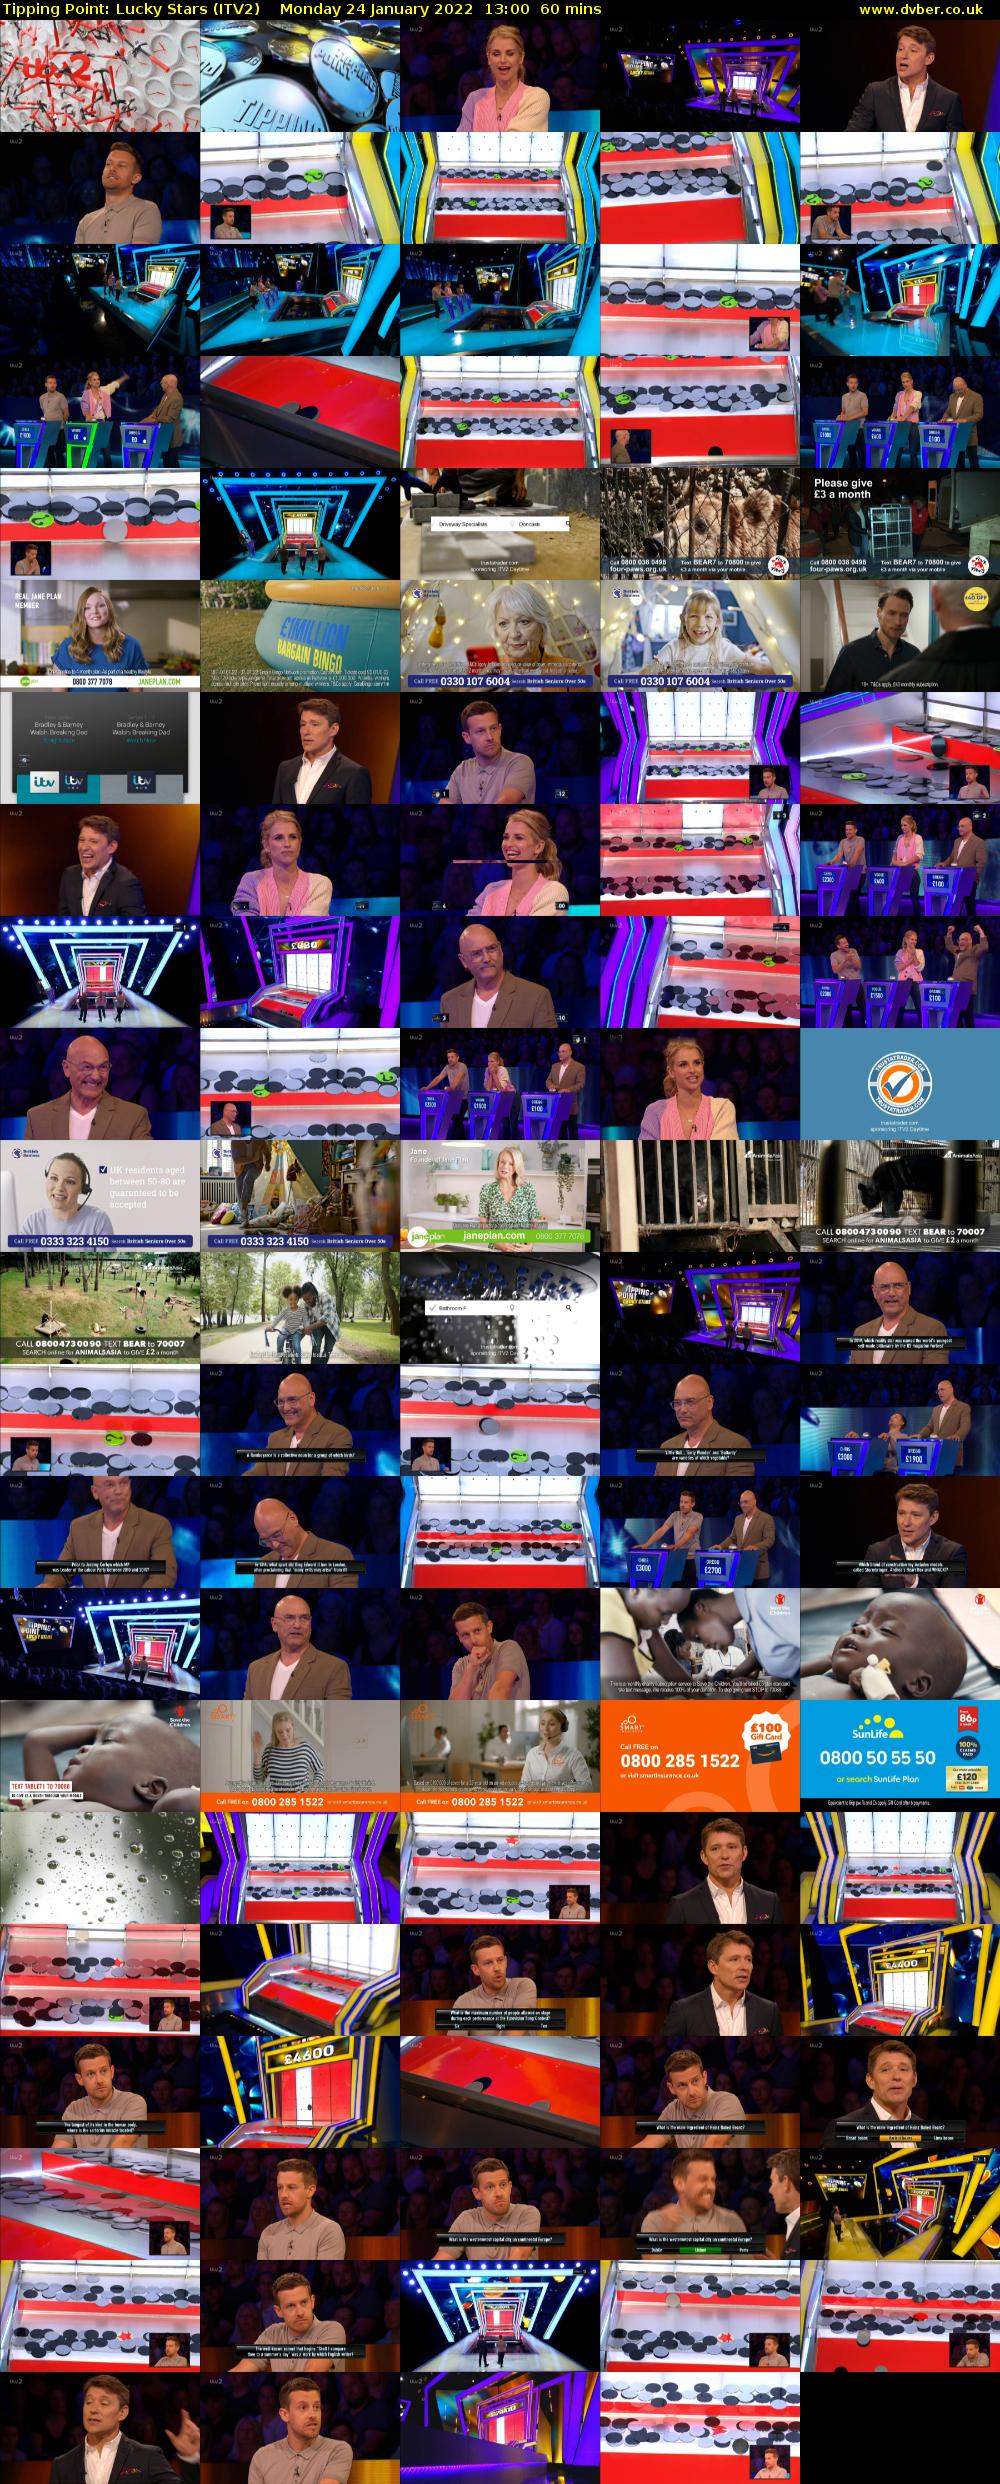 Tipping Point: Lucky Stars (ITV2) Monday 24 January 2022 13:00 - 14:00